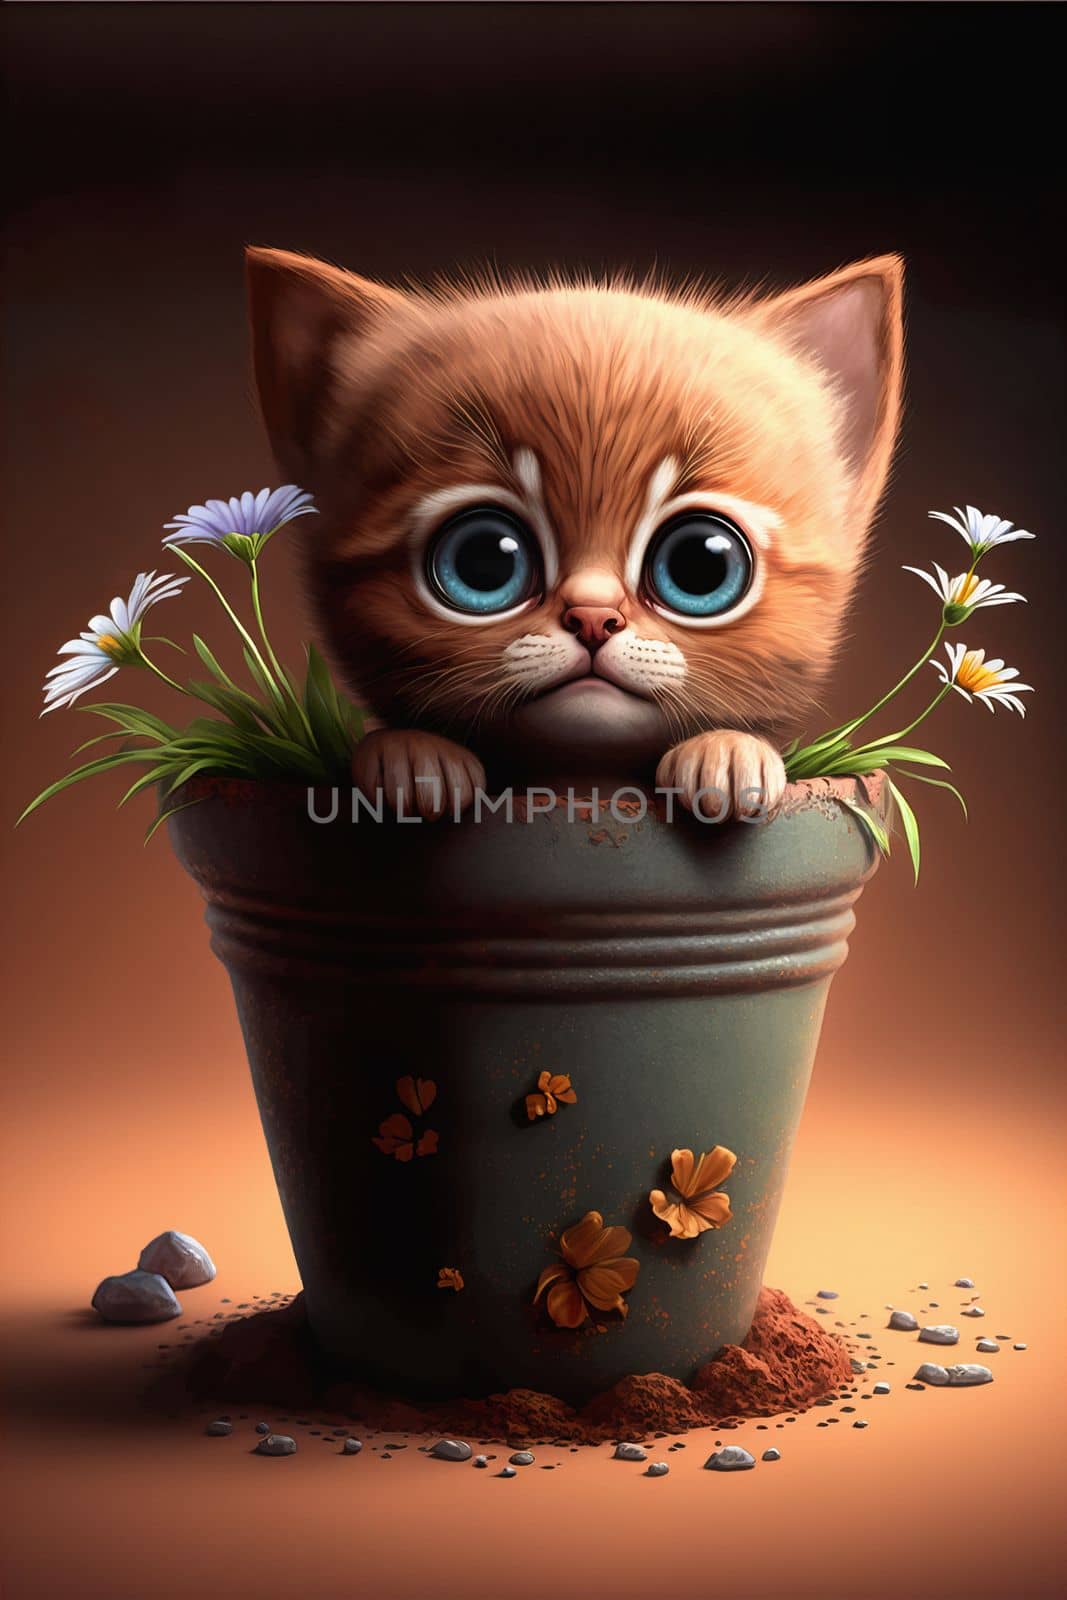 Cute baby kitten coming out of green pot. Illustration of small kitten sitting in a pot with a flowers. Download image